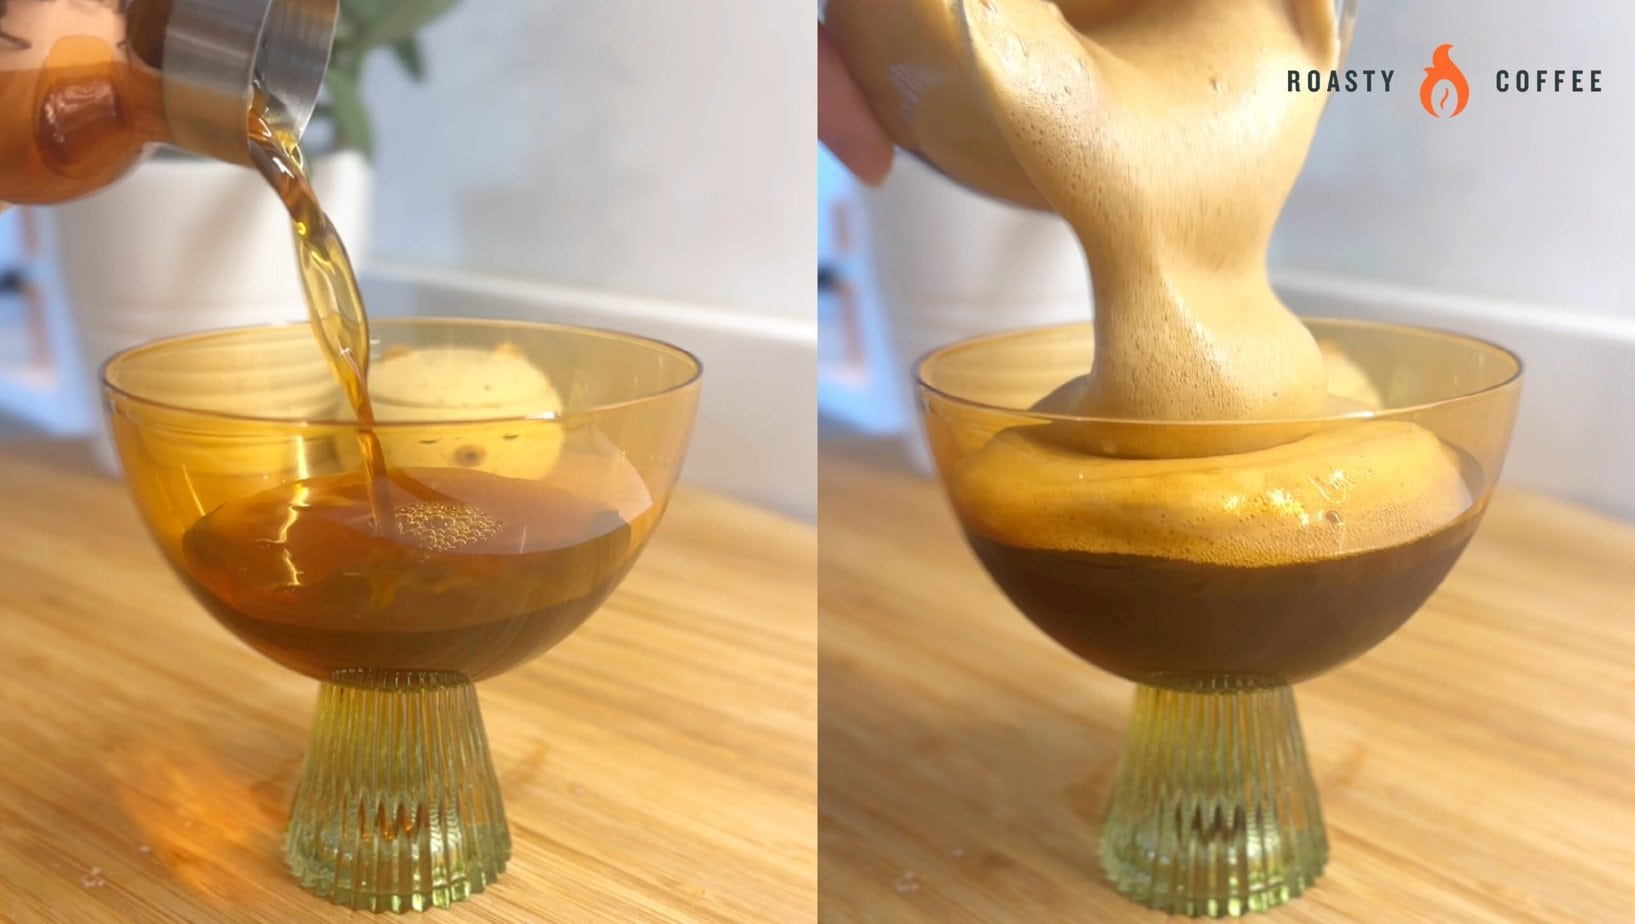 Pour the liquid into a cocktail glass and top with Dalgona coffee